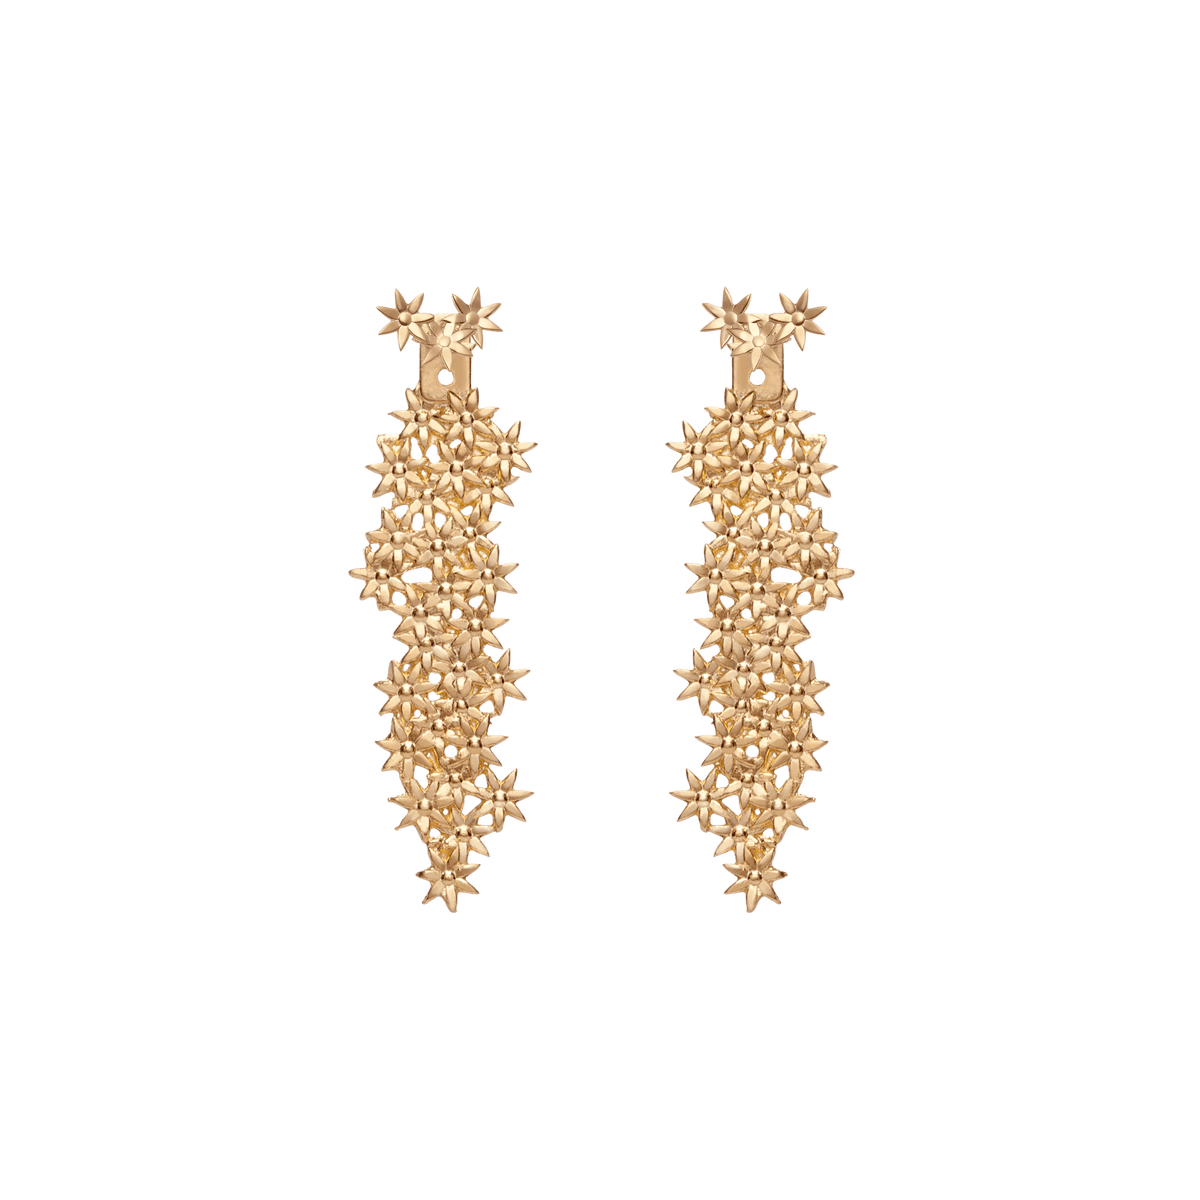 Earring Backs Heavy Weight 14k Yellow Gold (Pair)